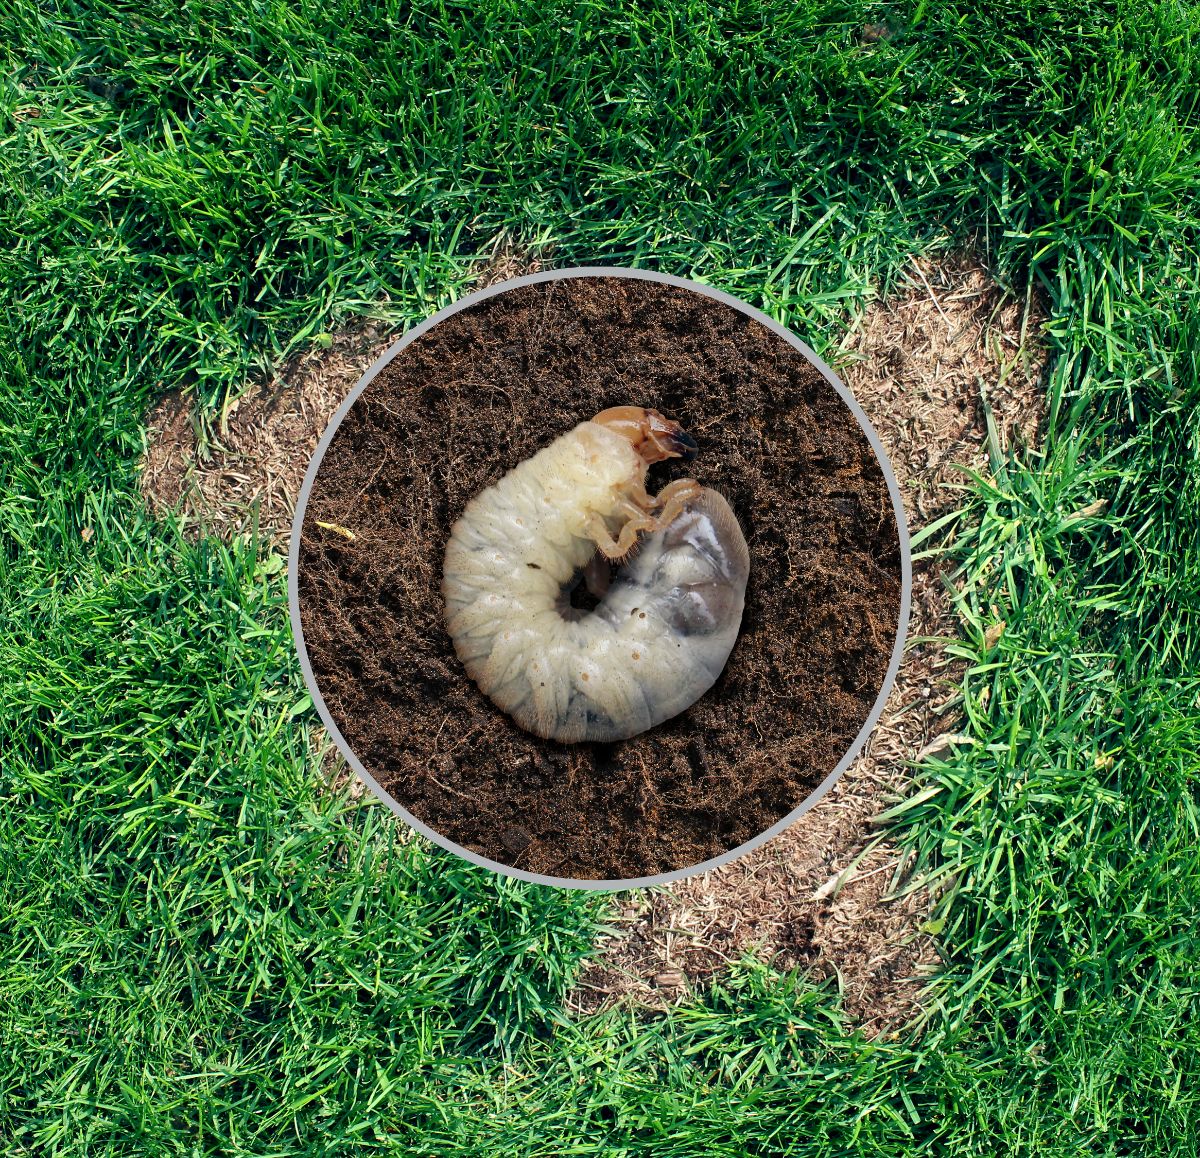 A grub curled up in soil overlayed onto dead grass